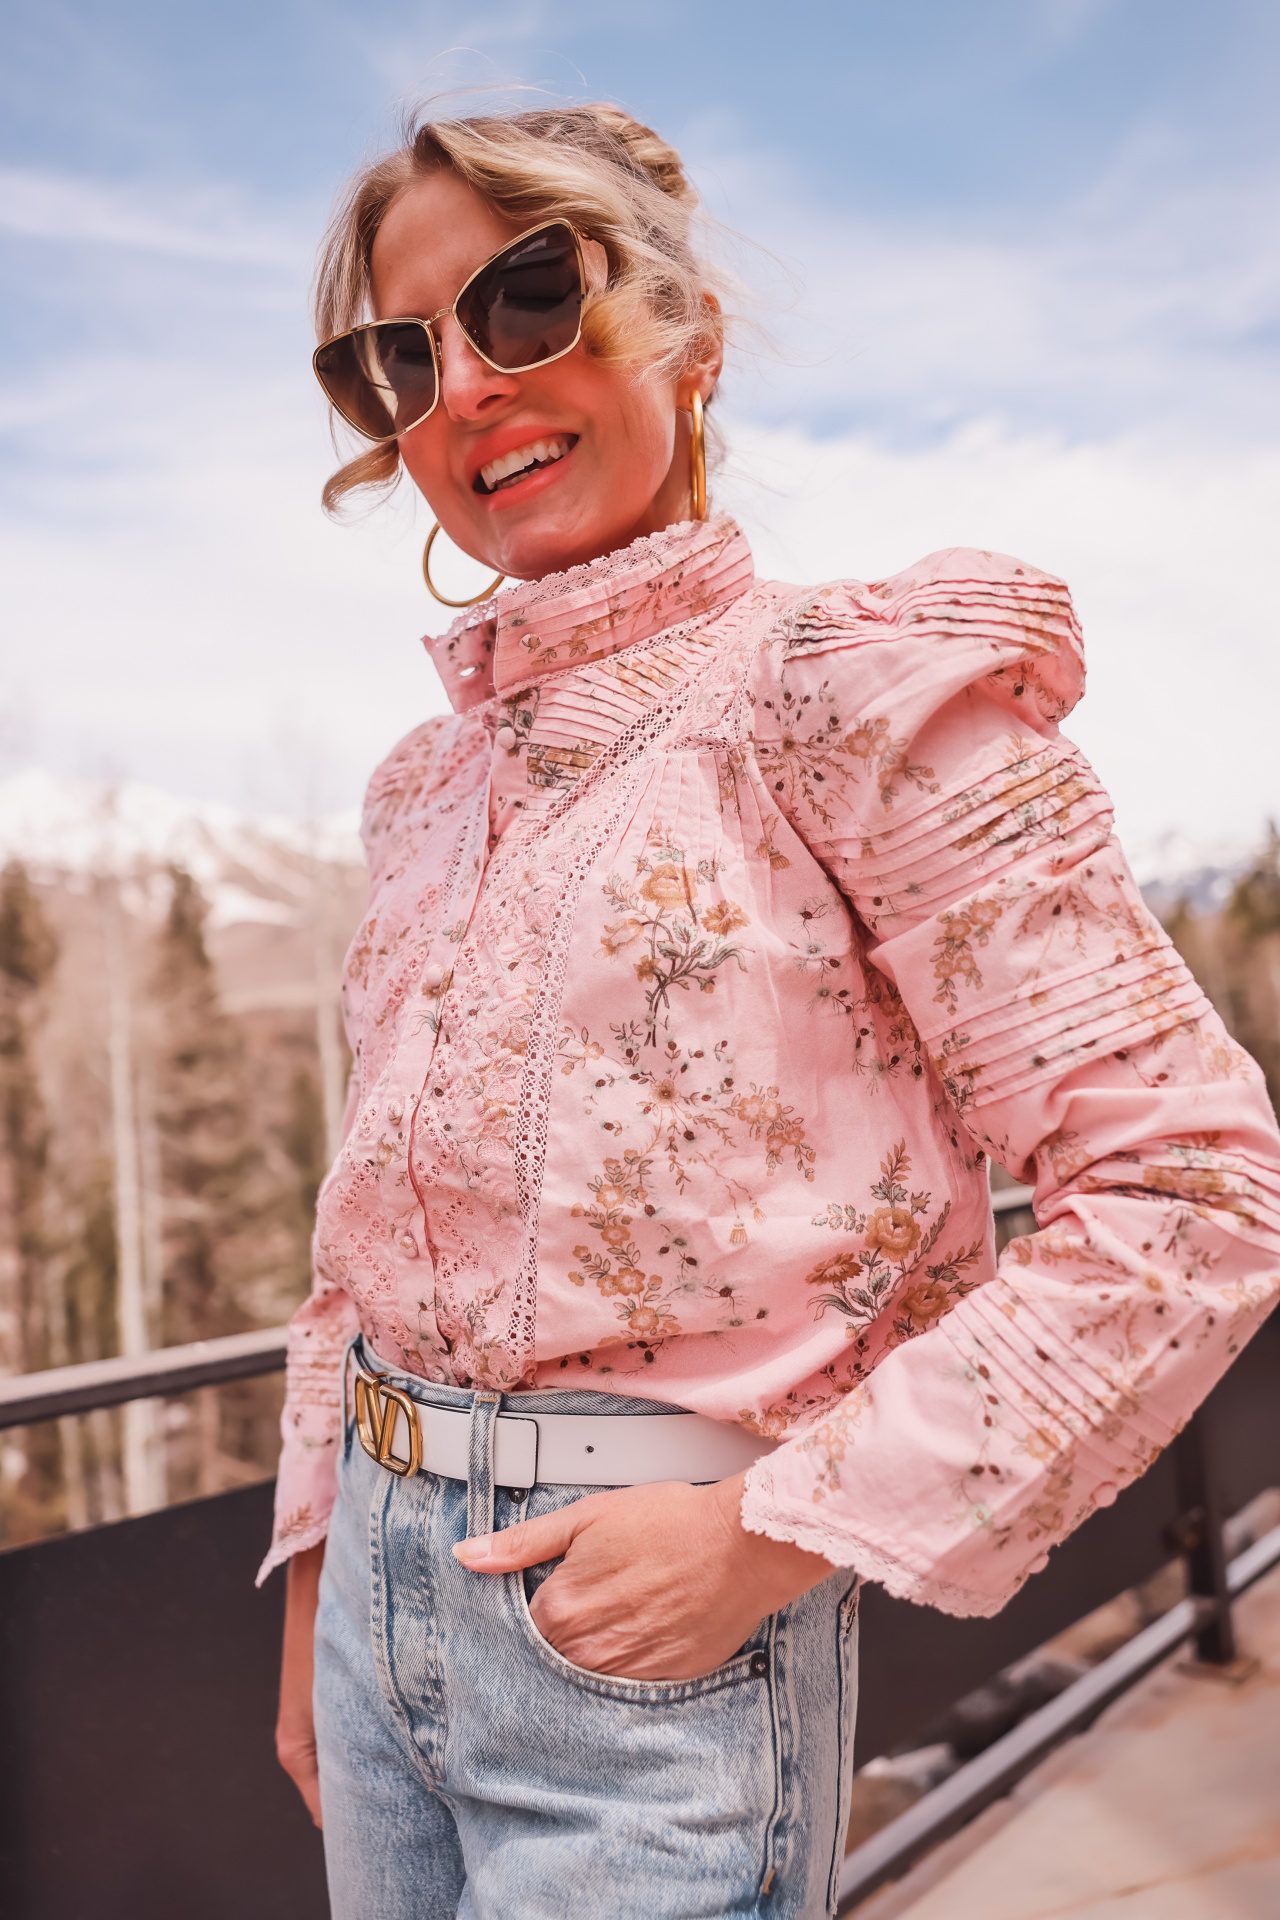 summer tops, best summer tops, casual summer tops, trendy summer tops, floral summer tops, loveshackfancy pink floral blouse, erin busbee, busbee style, fashion over 40, telluride, colorado, maui jim sunglasses, white valentino belt, alice + olivia baggy jeans, vince camuto booties